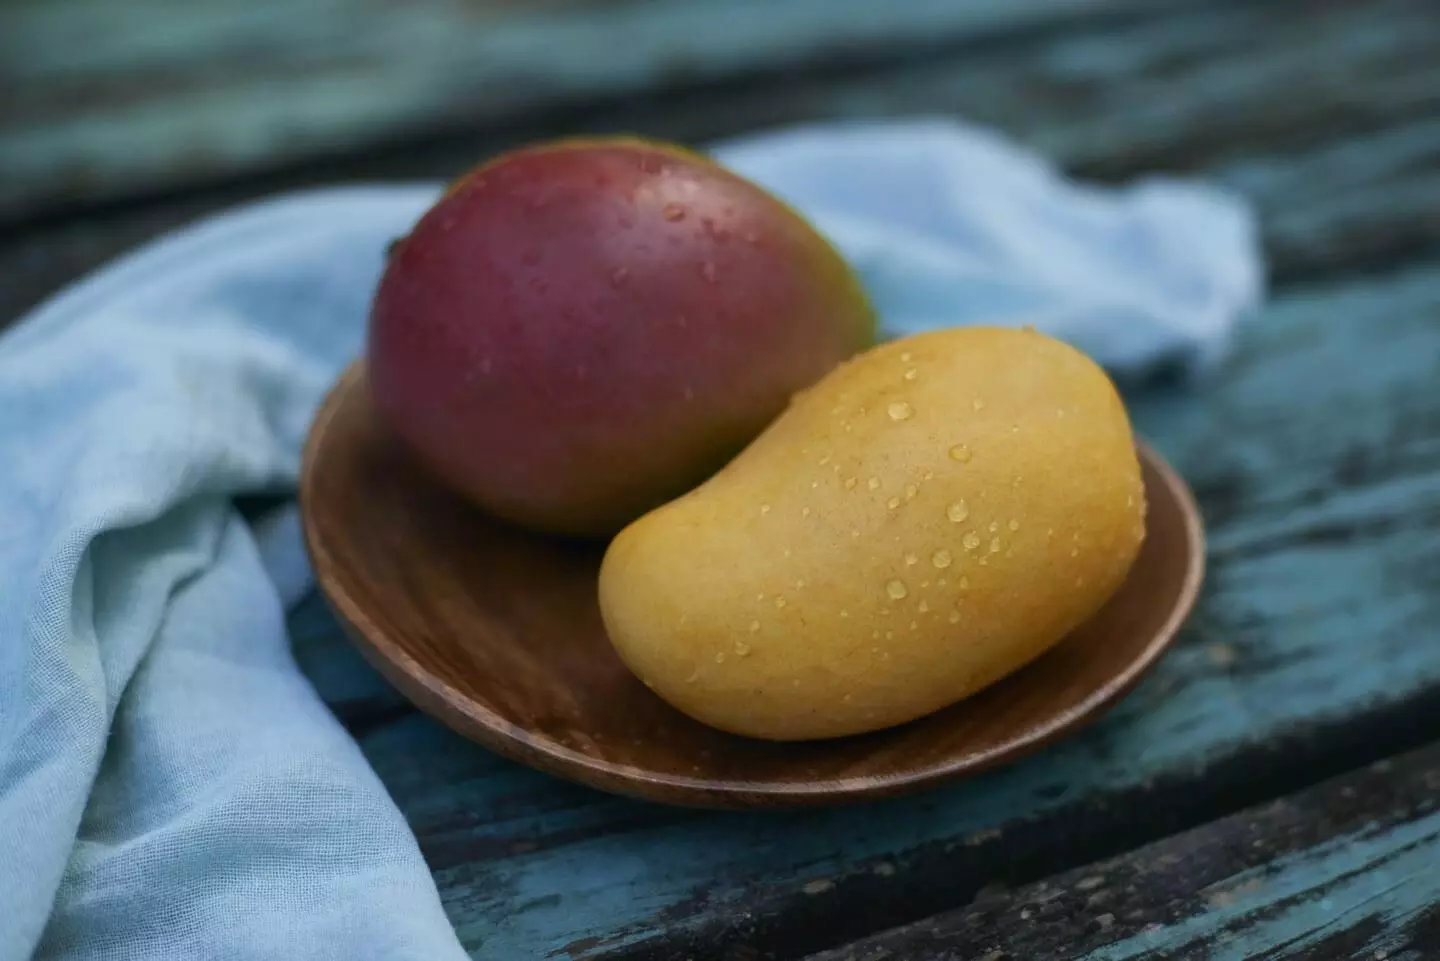 Snacking on mango may help manage blood sugar and inflammation: Study